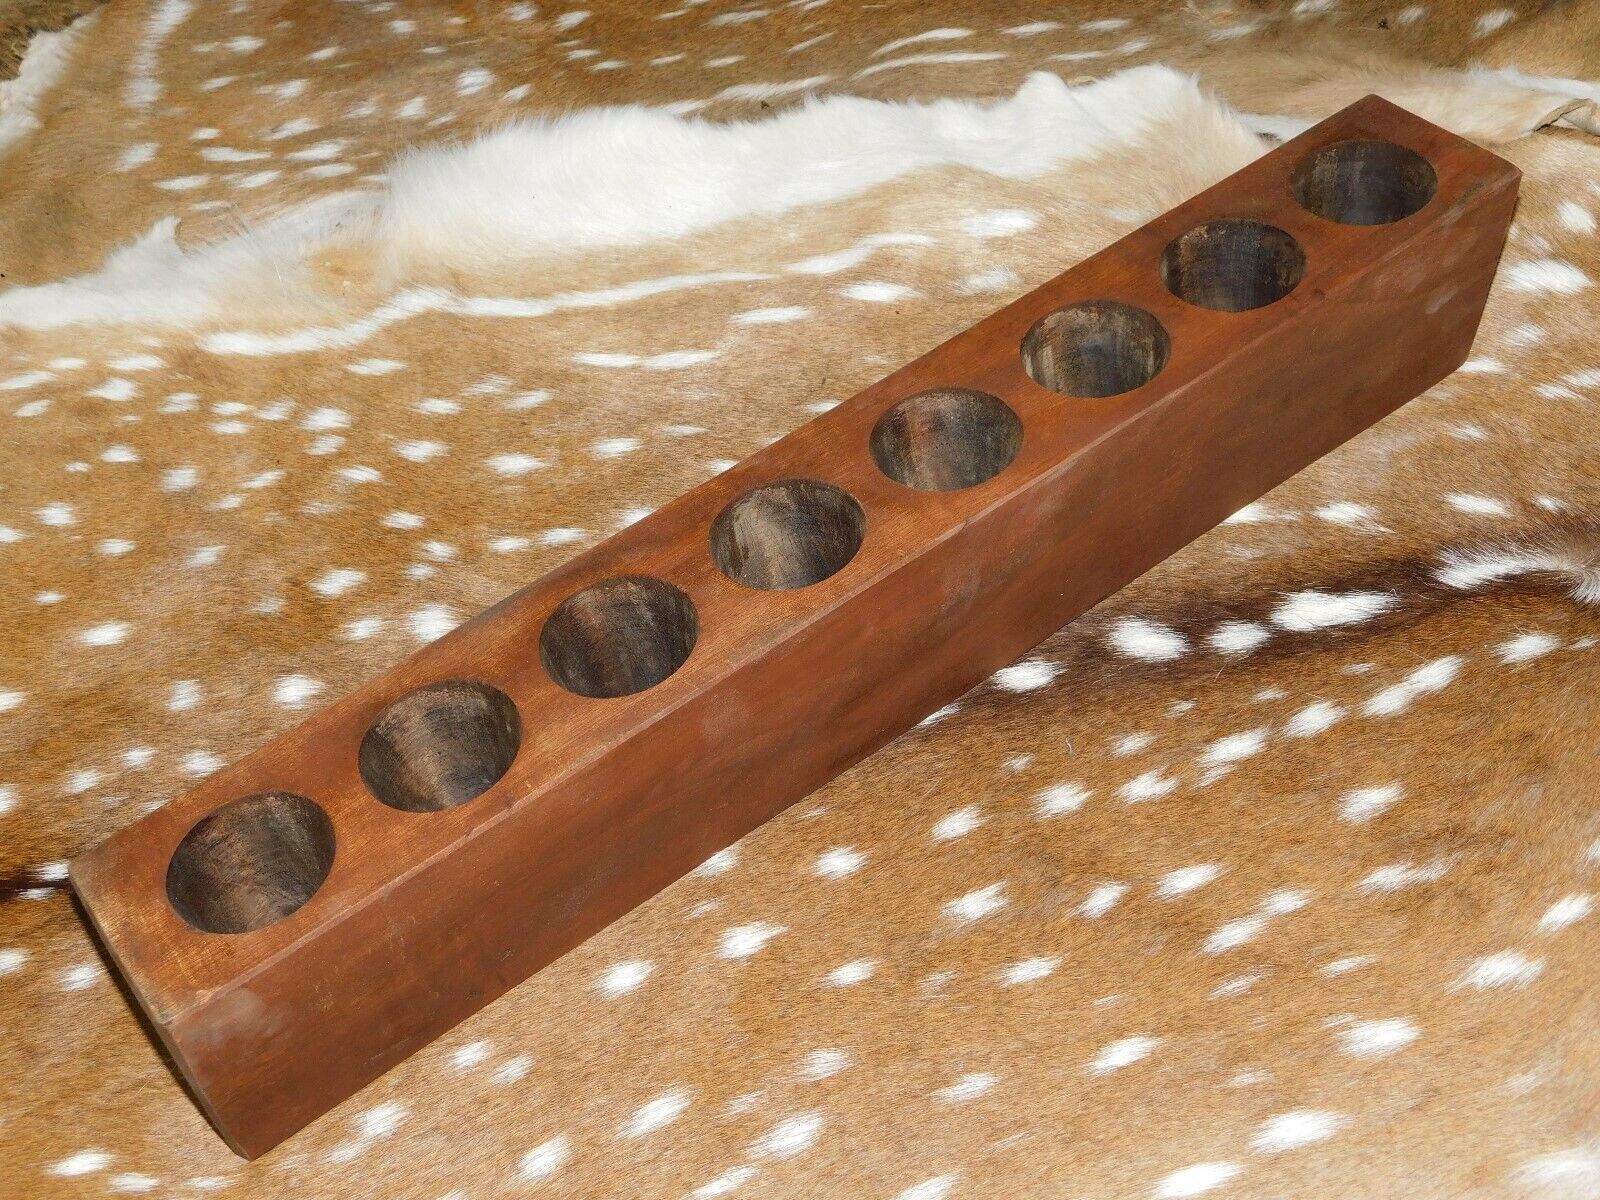 8 Hole Wooden Sugar Mold Wood Candle Holder Primitive Rustic Home Decor